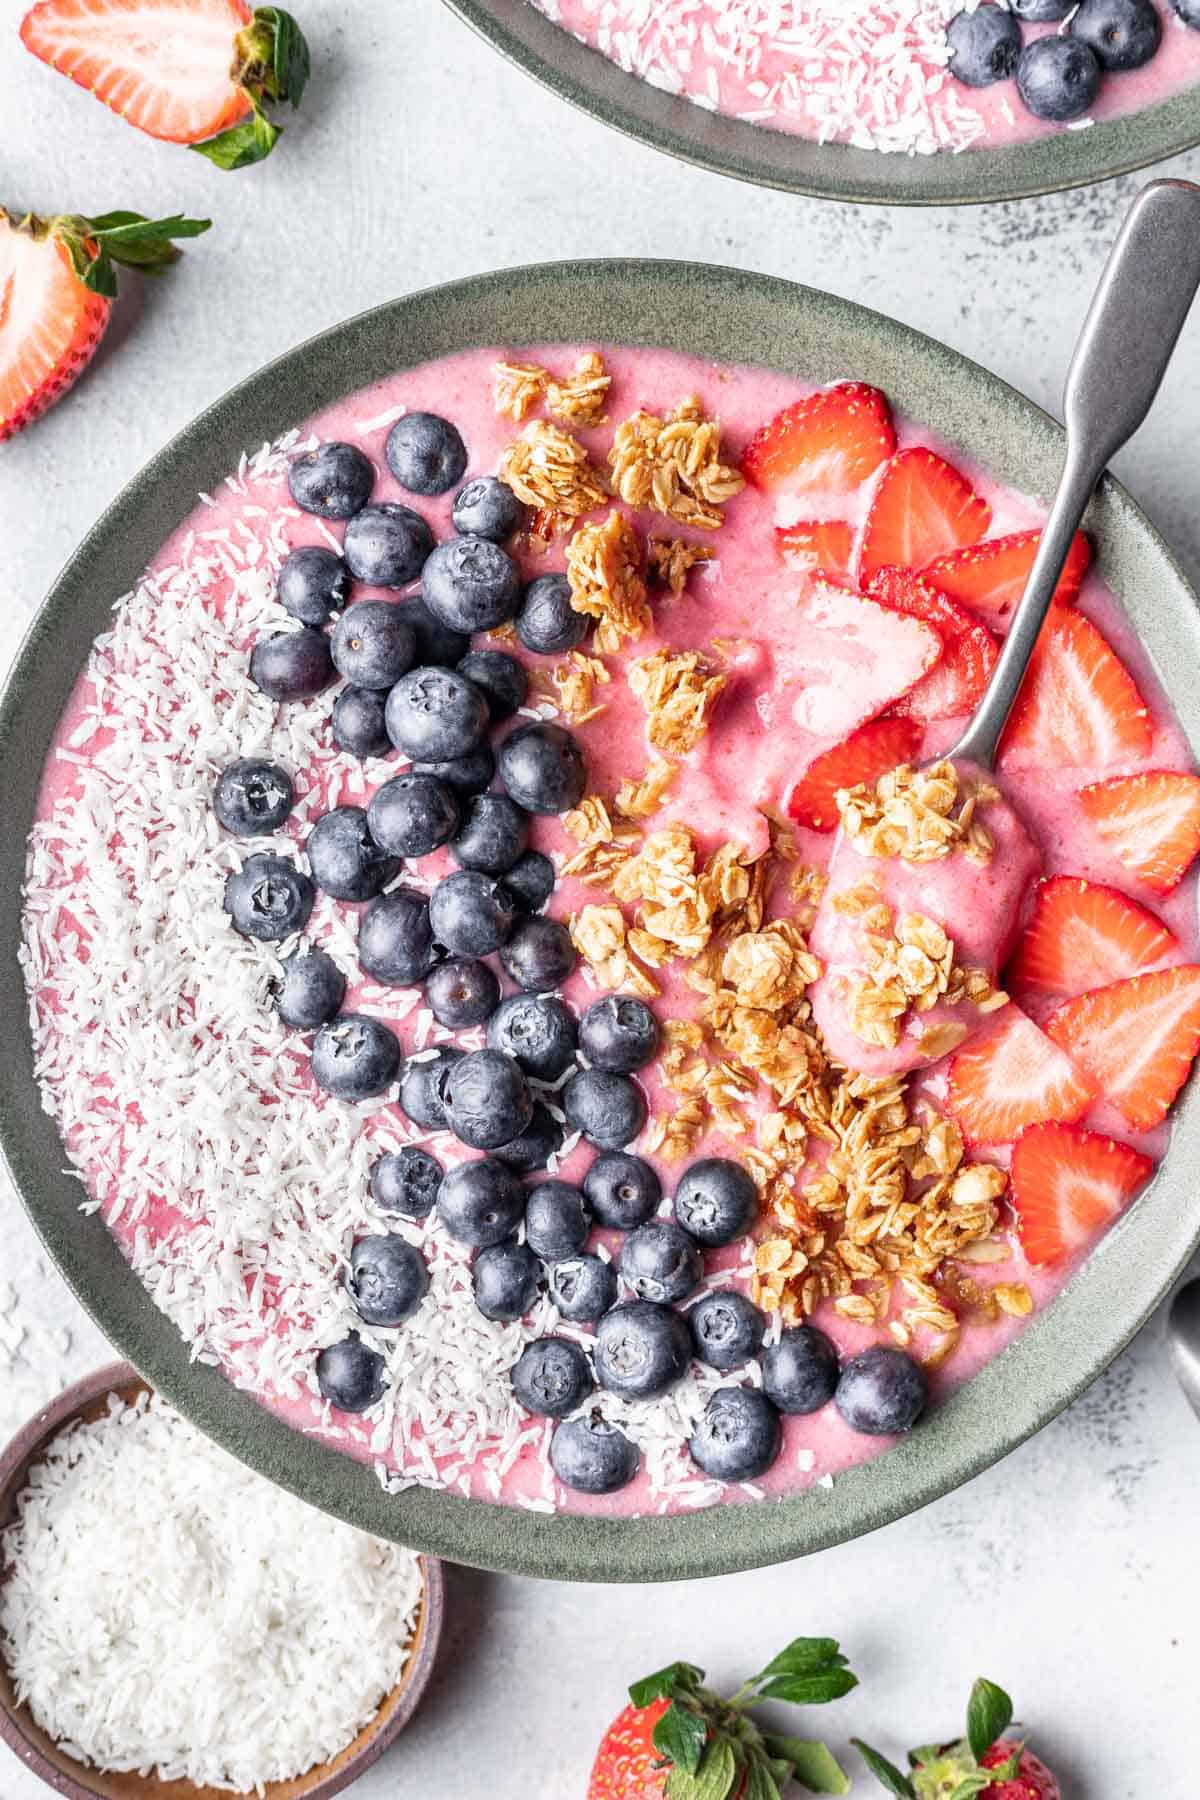 Strawberry smoothie bowl topped with coconut, blueberries, granola, and strawberries.